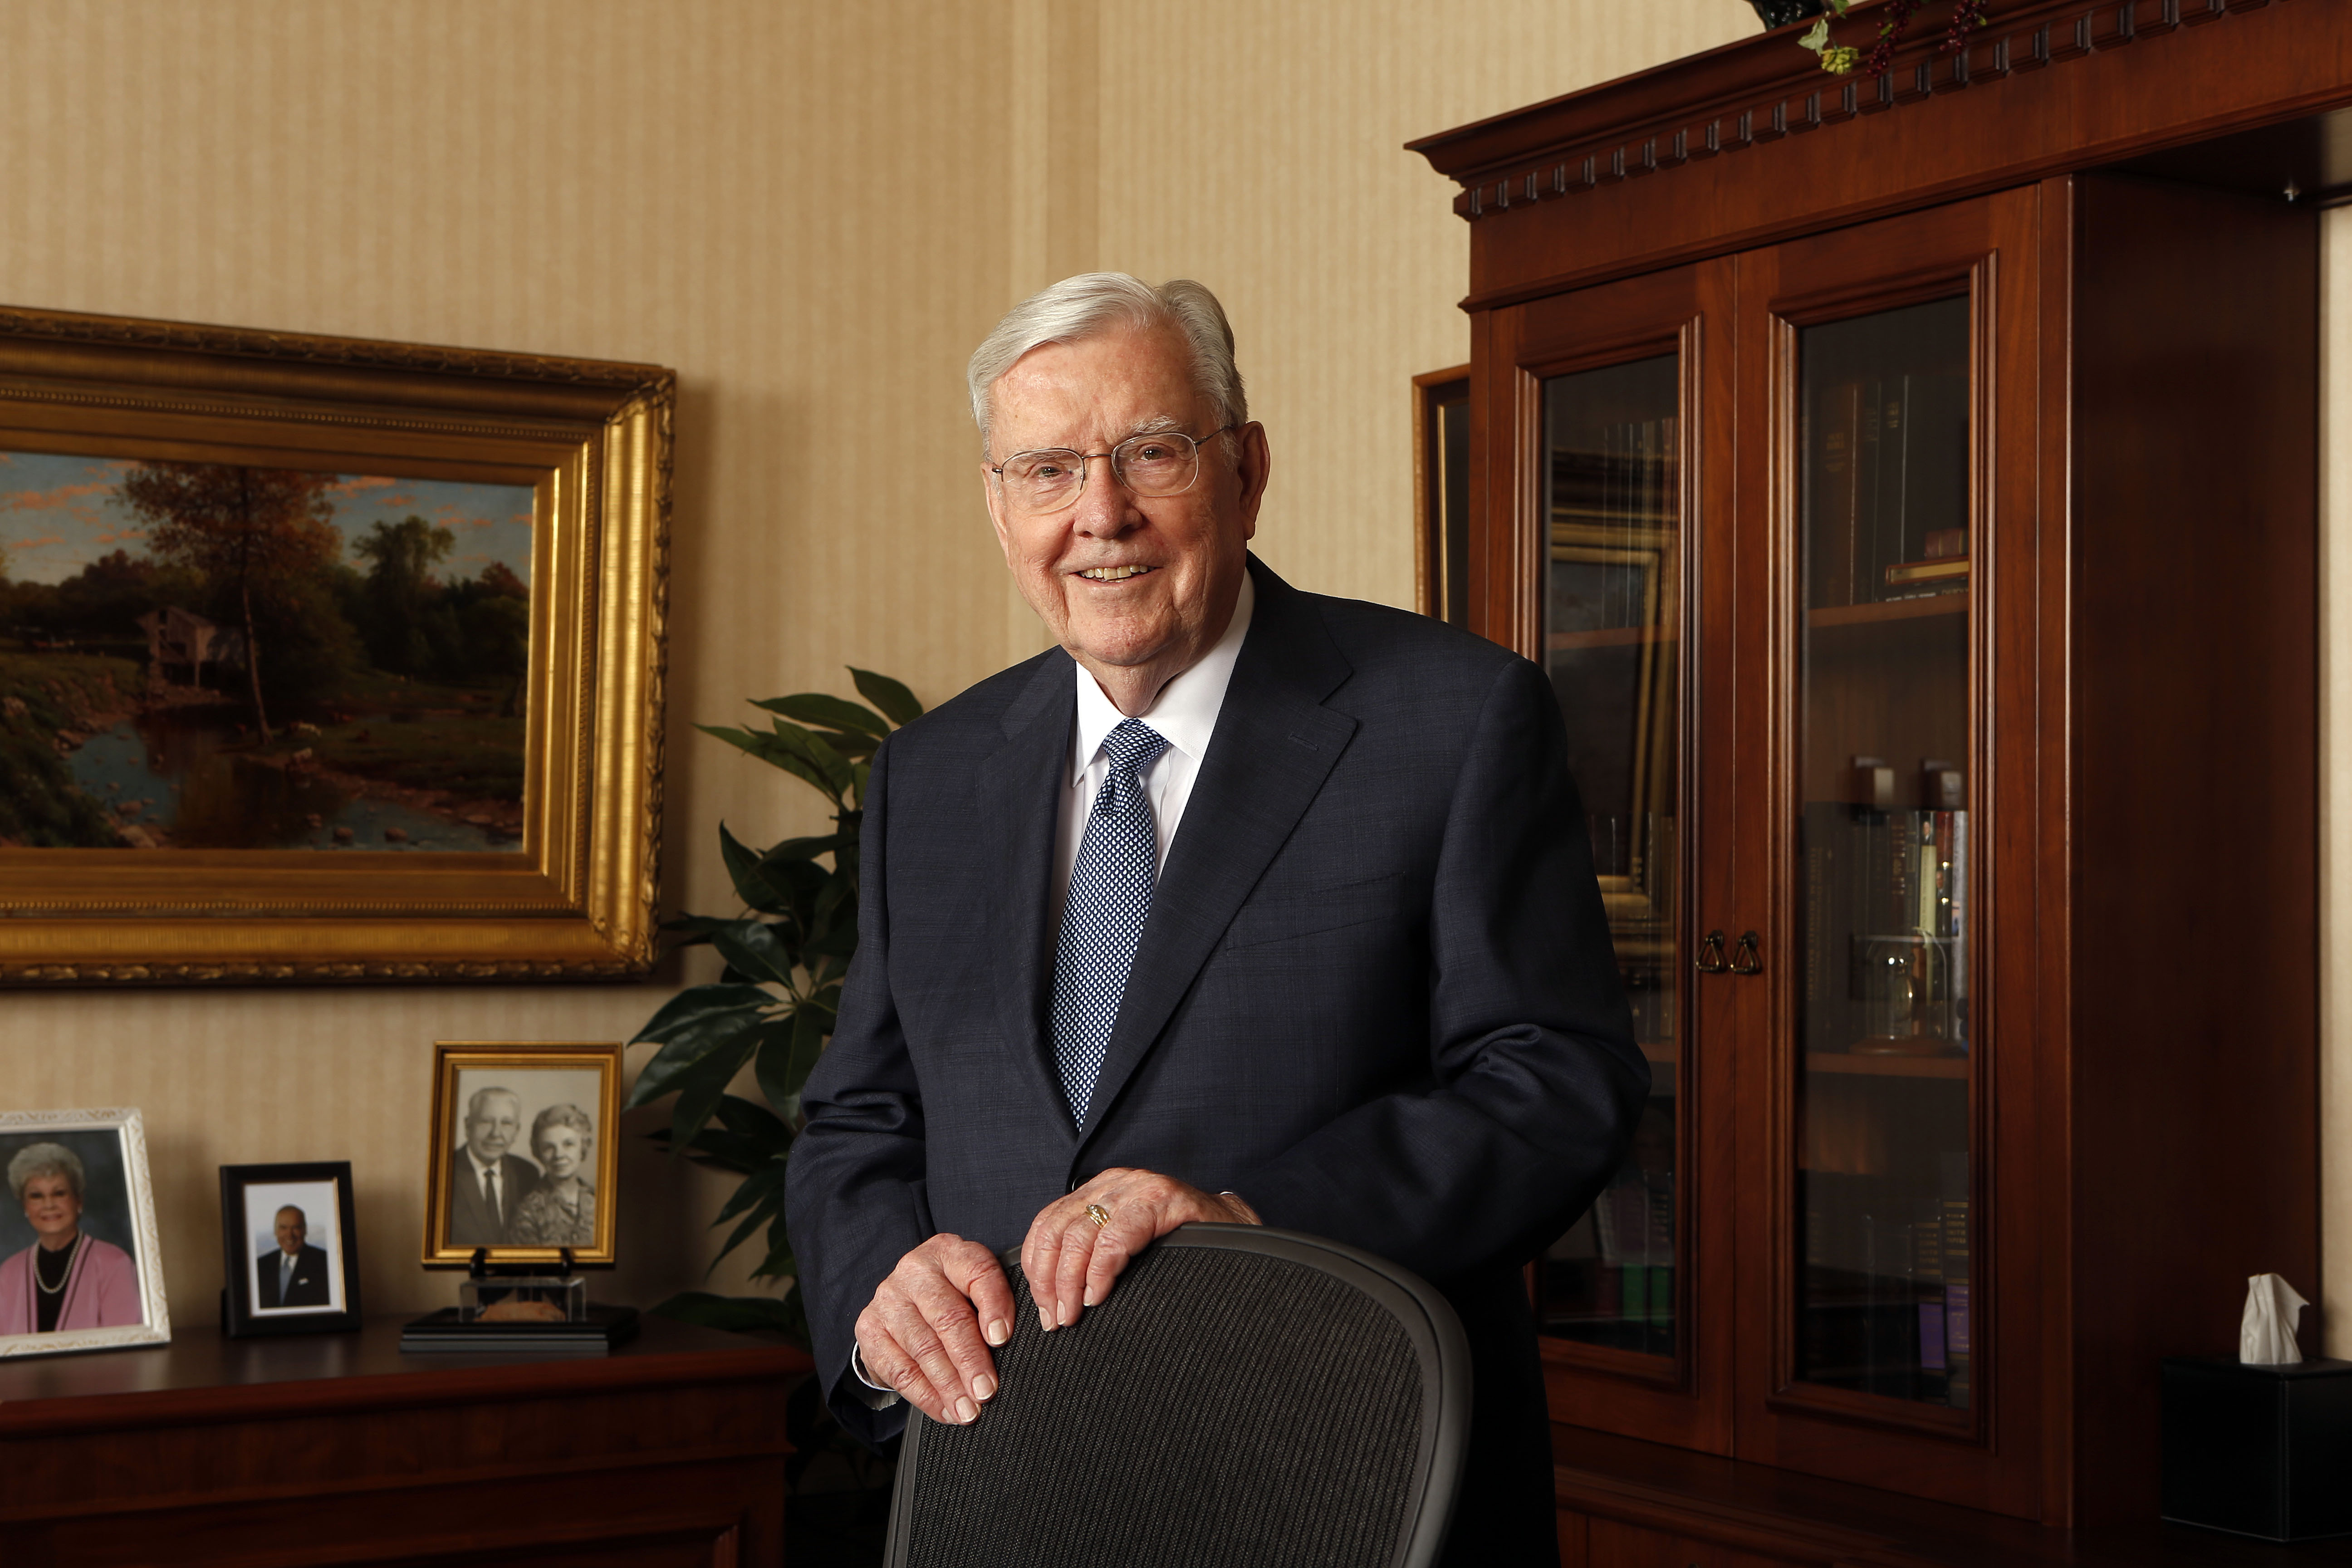 President M. Russell Ballard, Acting President of the Quorum of the Twelve Apostles, poses for a photo in his office in Salt Lake City on Tuesday, March 13, 2018.